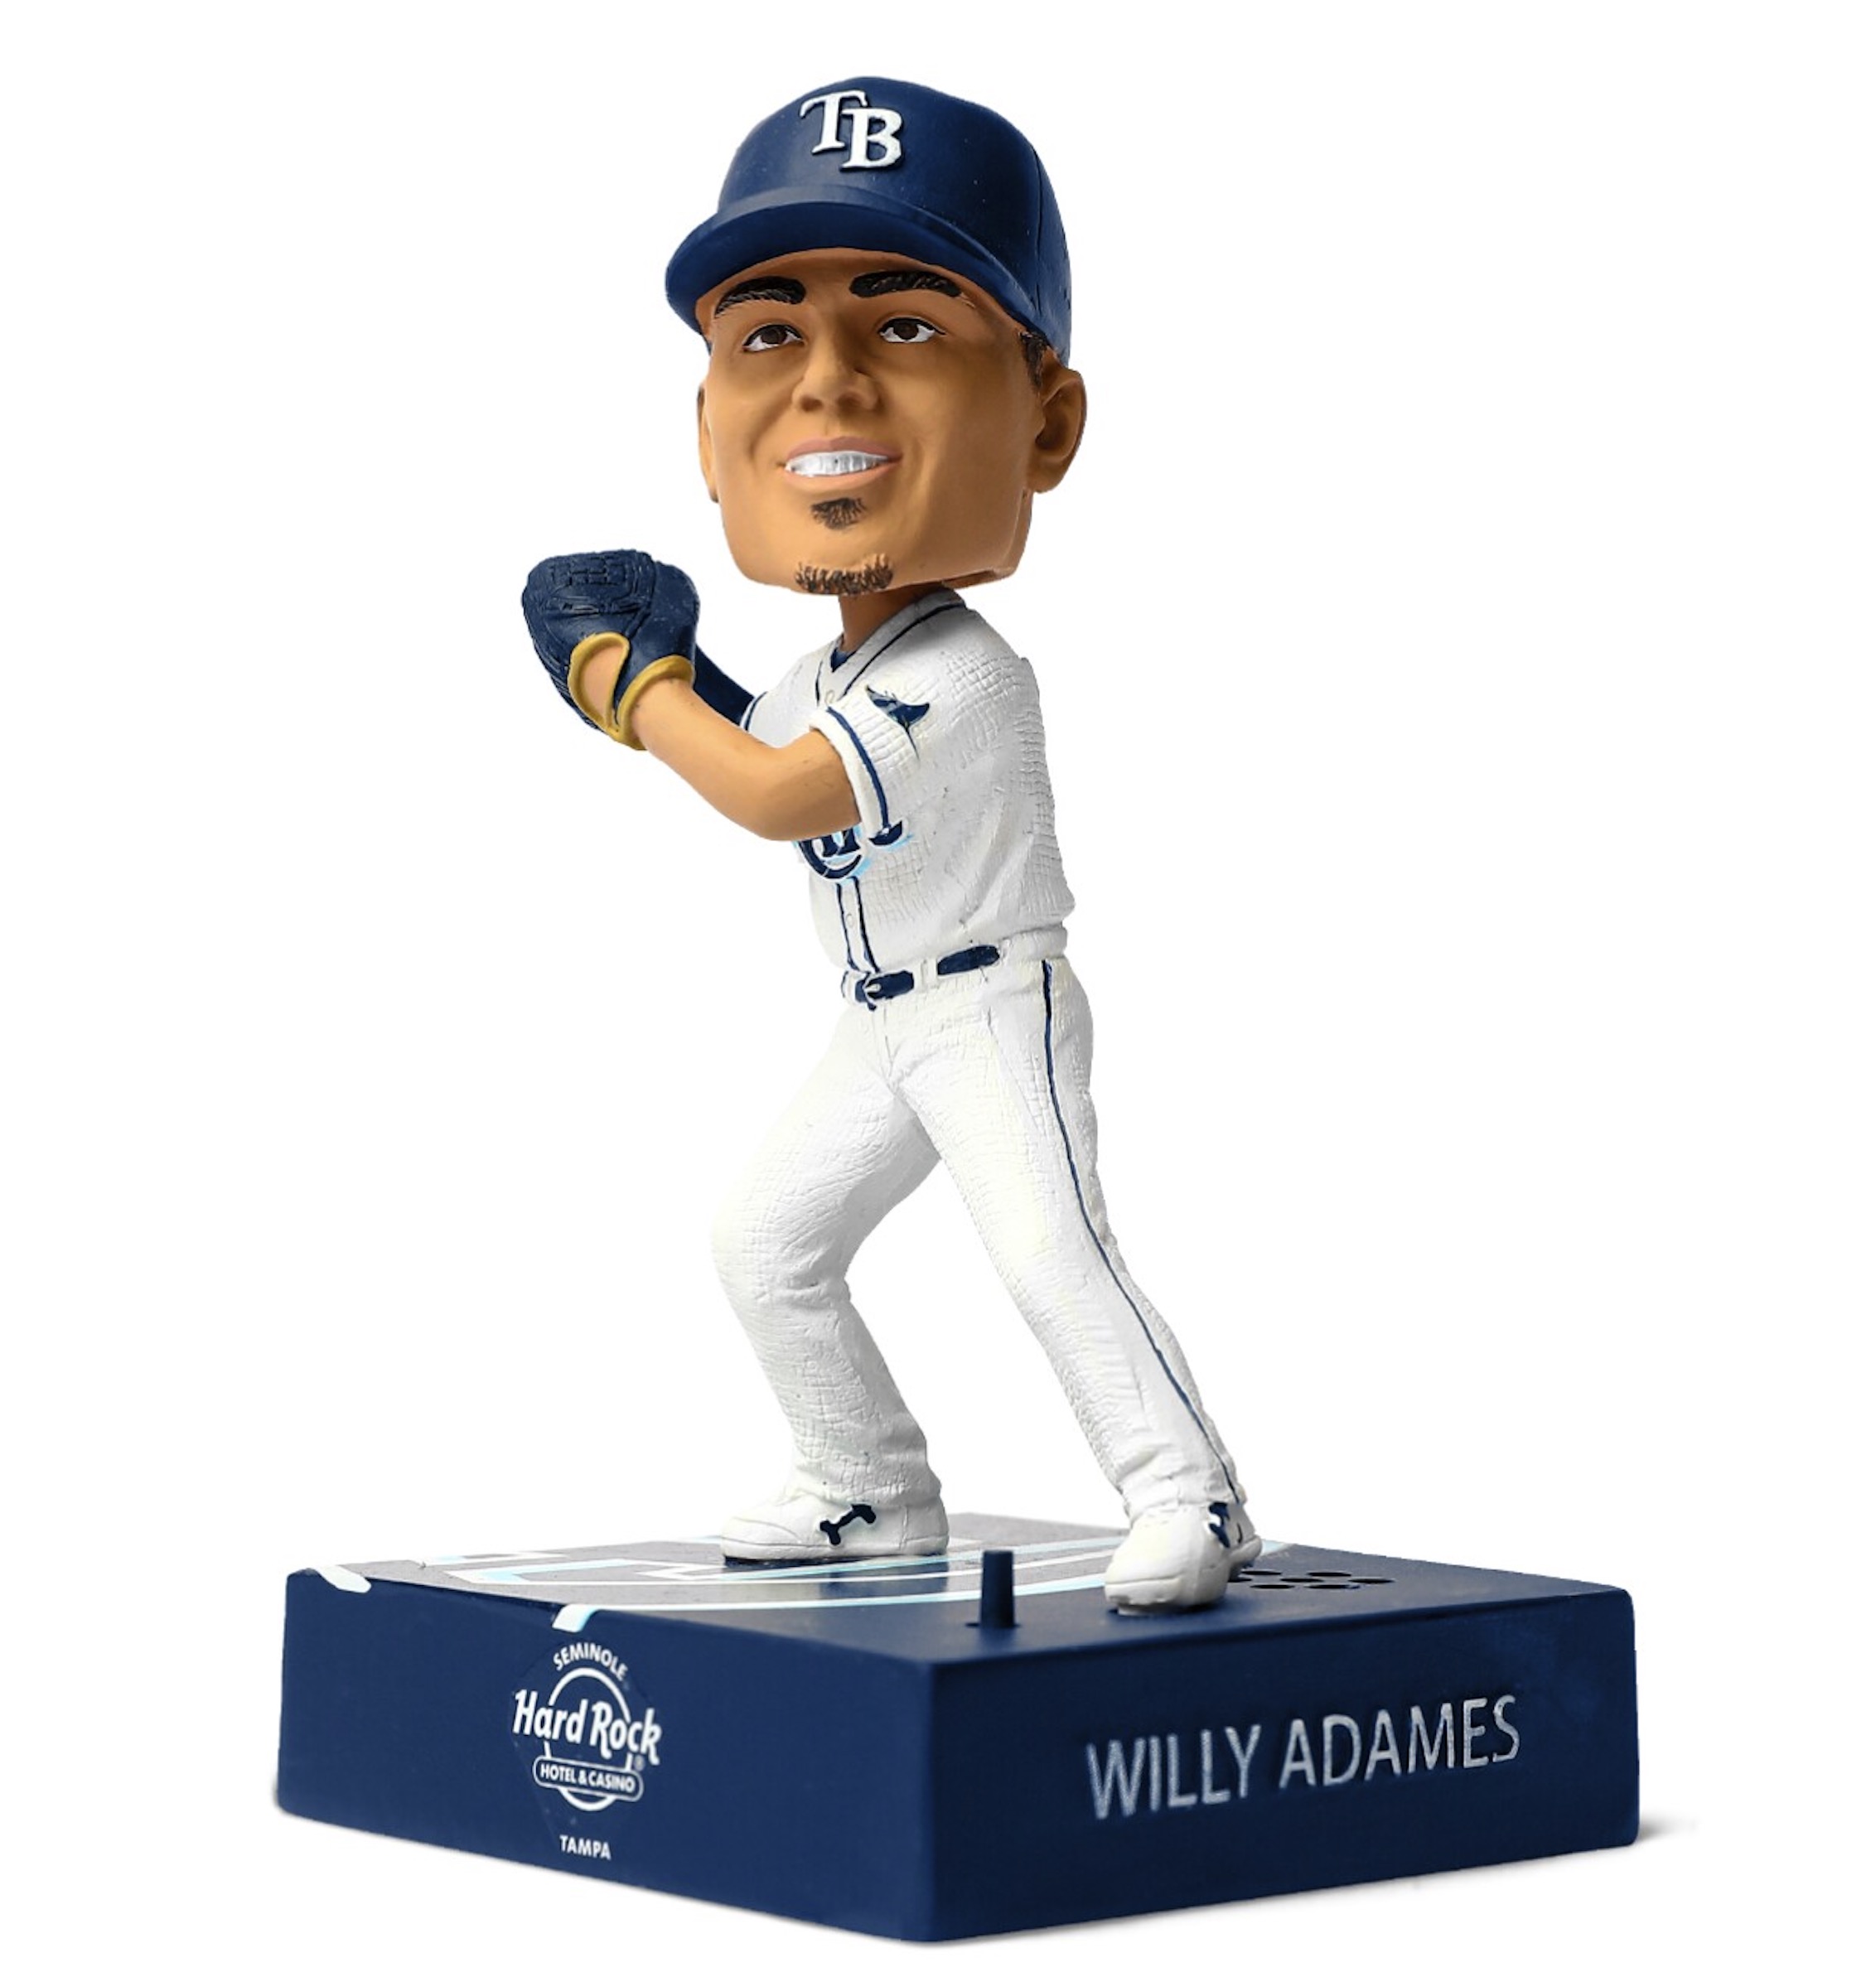 Willy Adames bobblehead